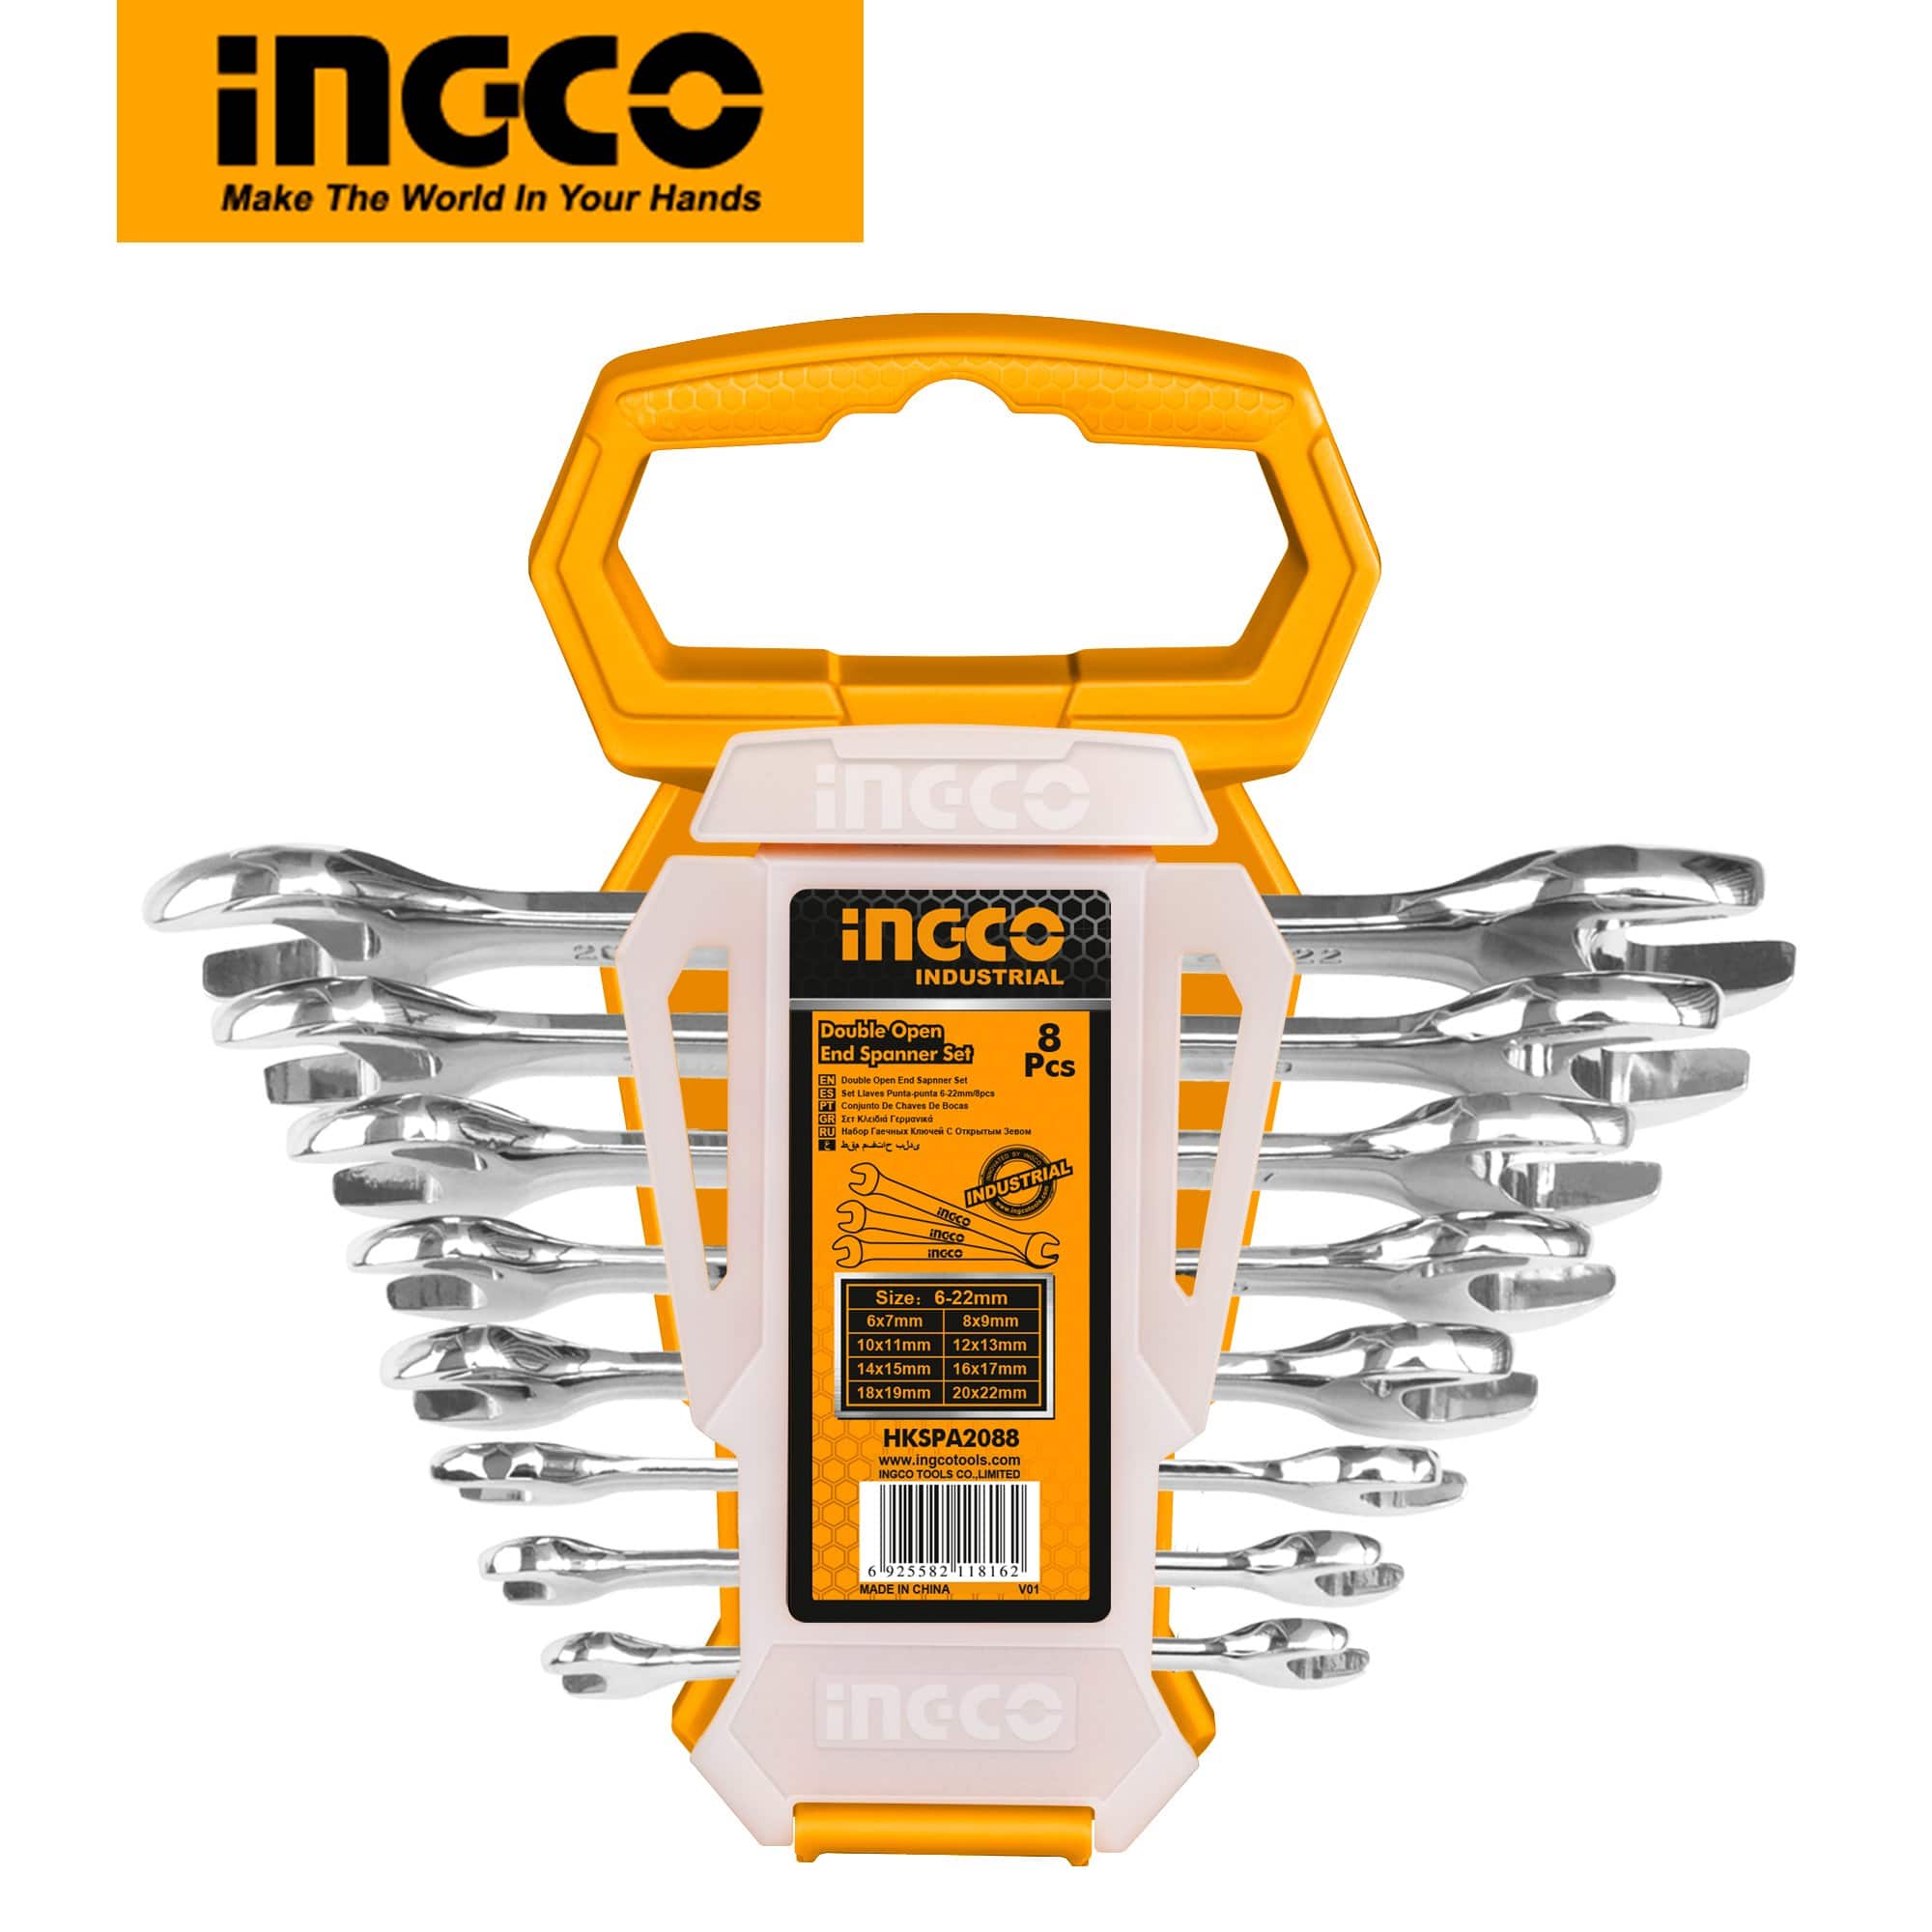 Ingco 8 Pieces Insulated Open End Spanner Set - HKSPA2088